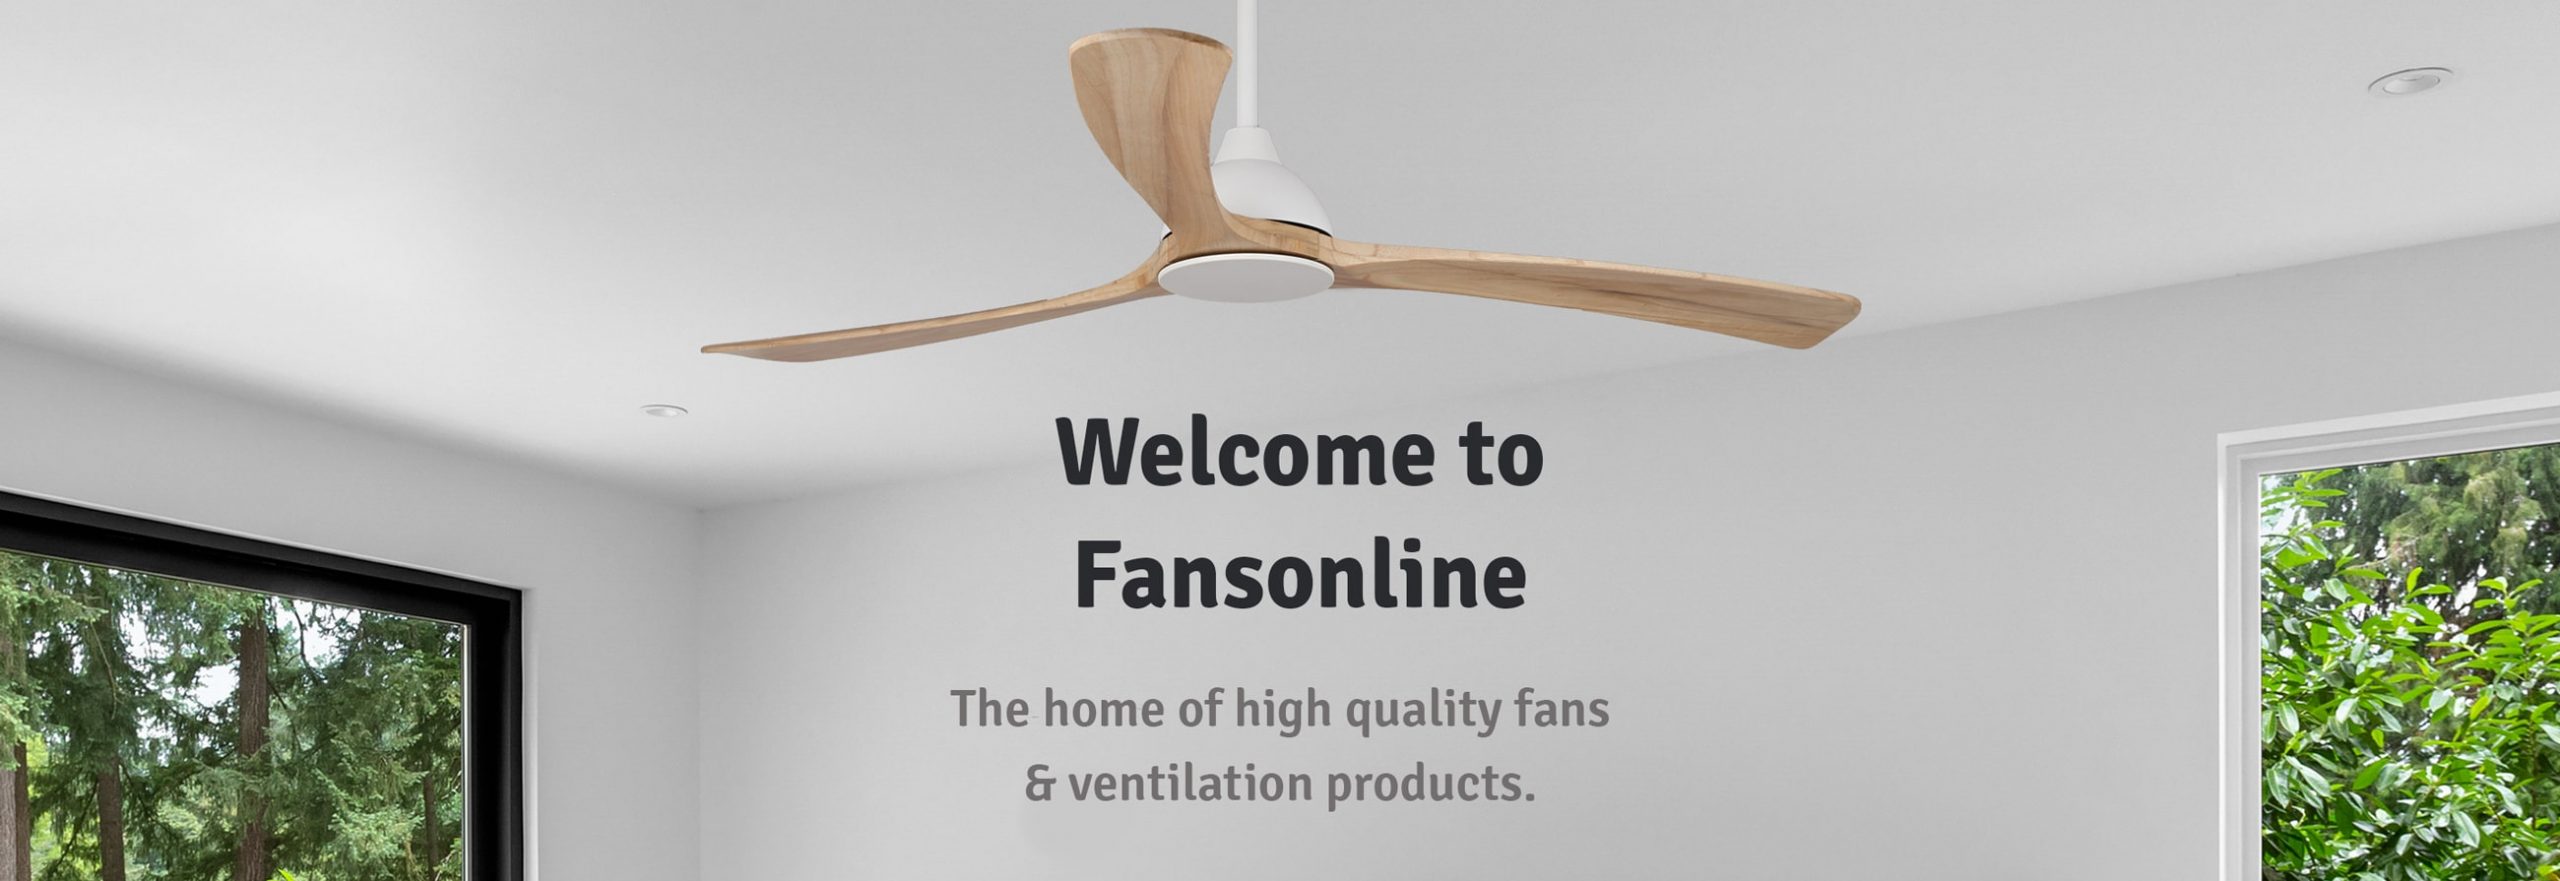 welcome to fansonline